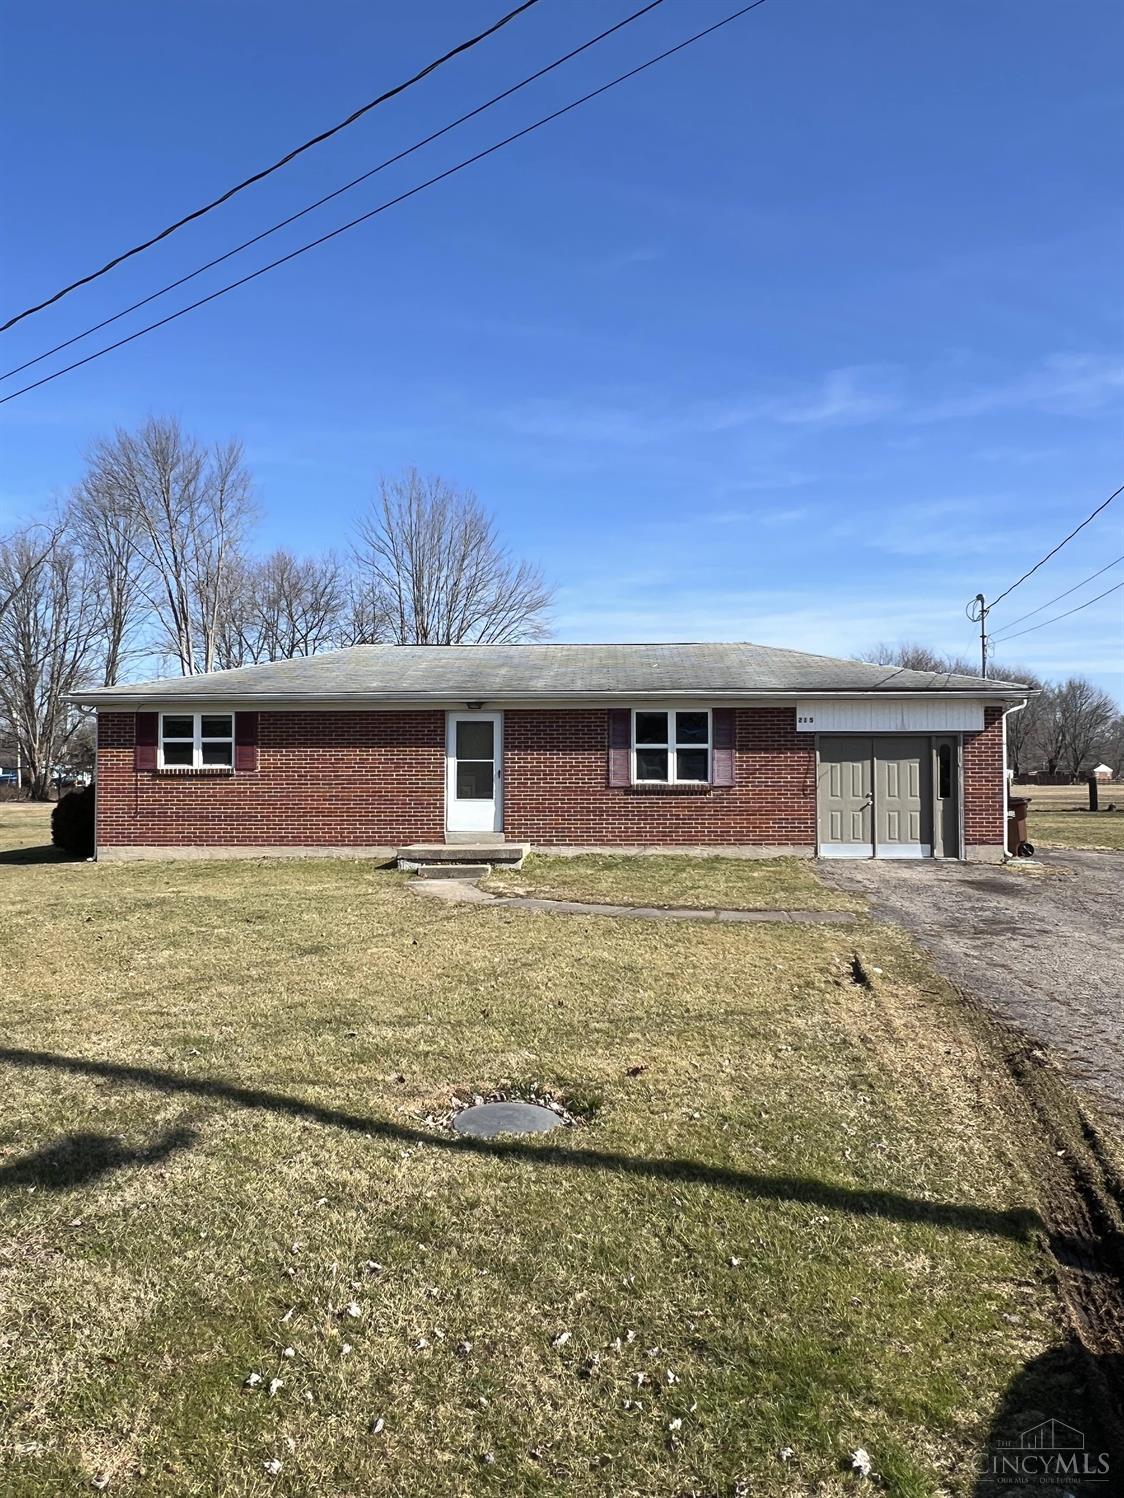 215 Holly Ln, Tate Twp, OH 45106